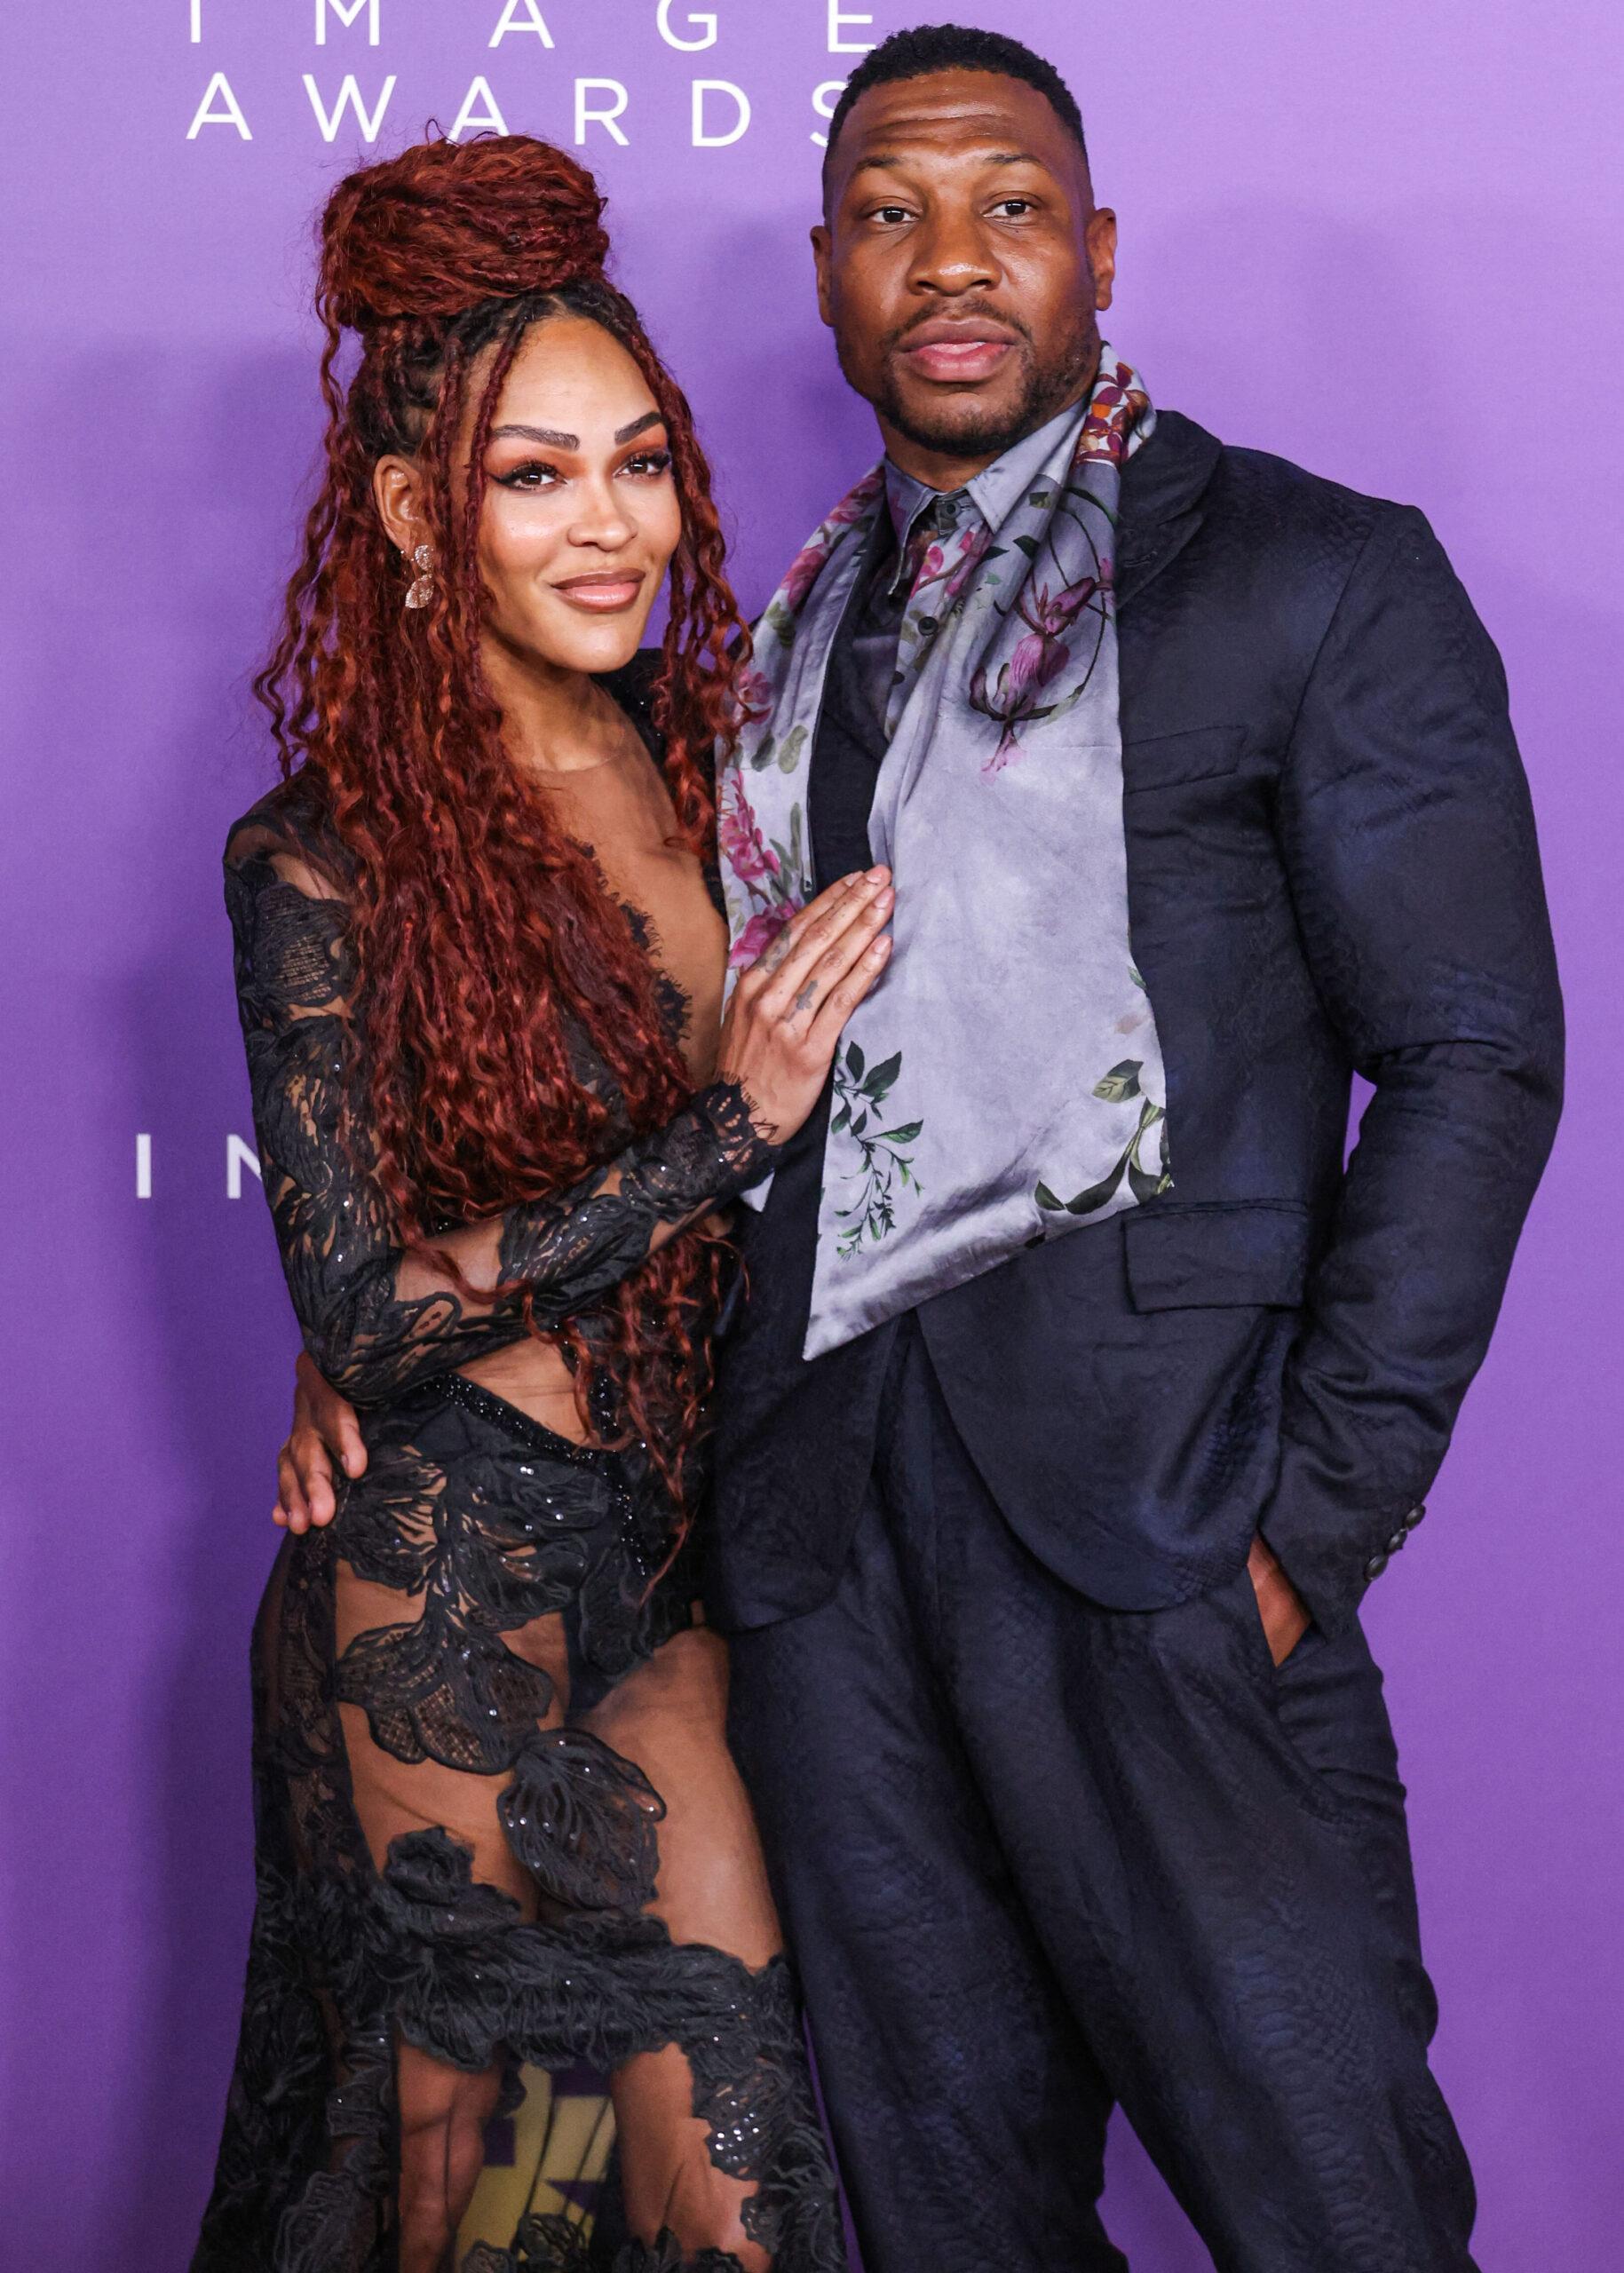 Jonathan Majors' GF Meagan Good Reveals How She Has Coped With His Legal Crisis